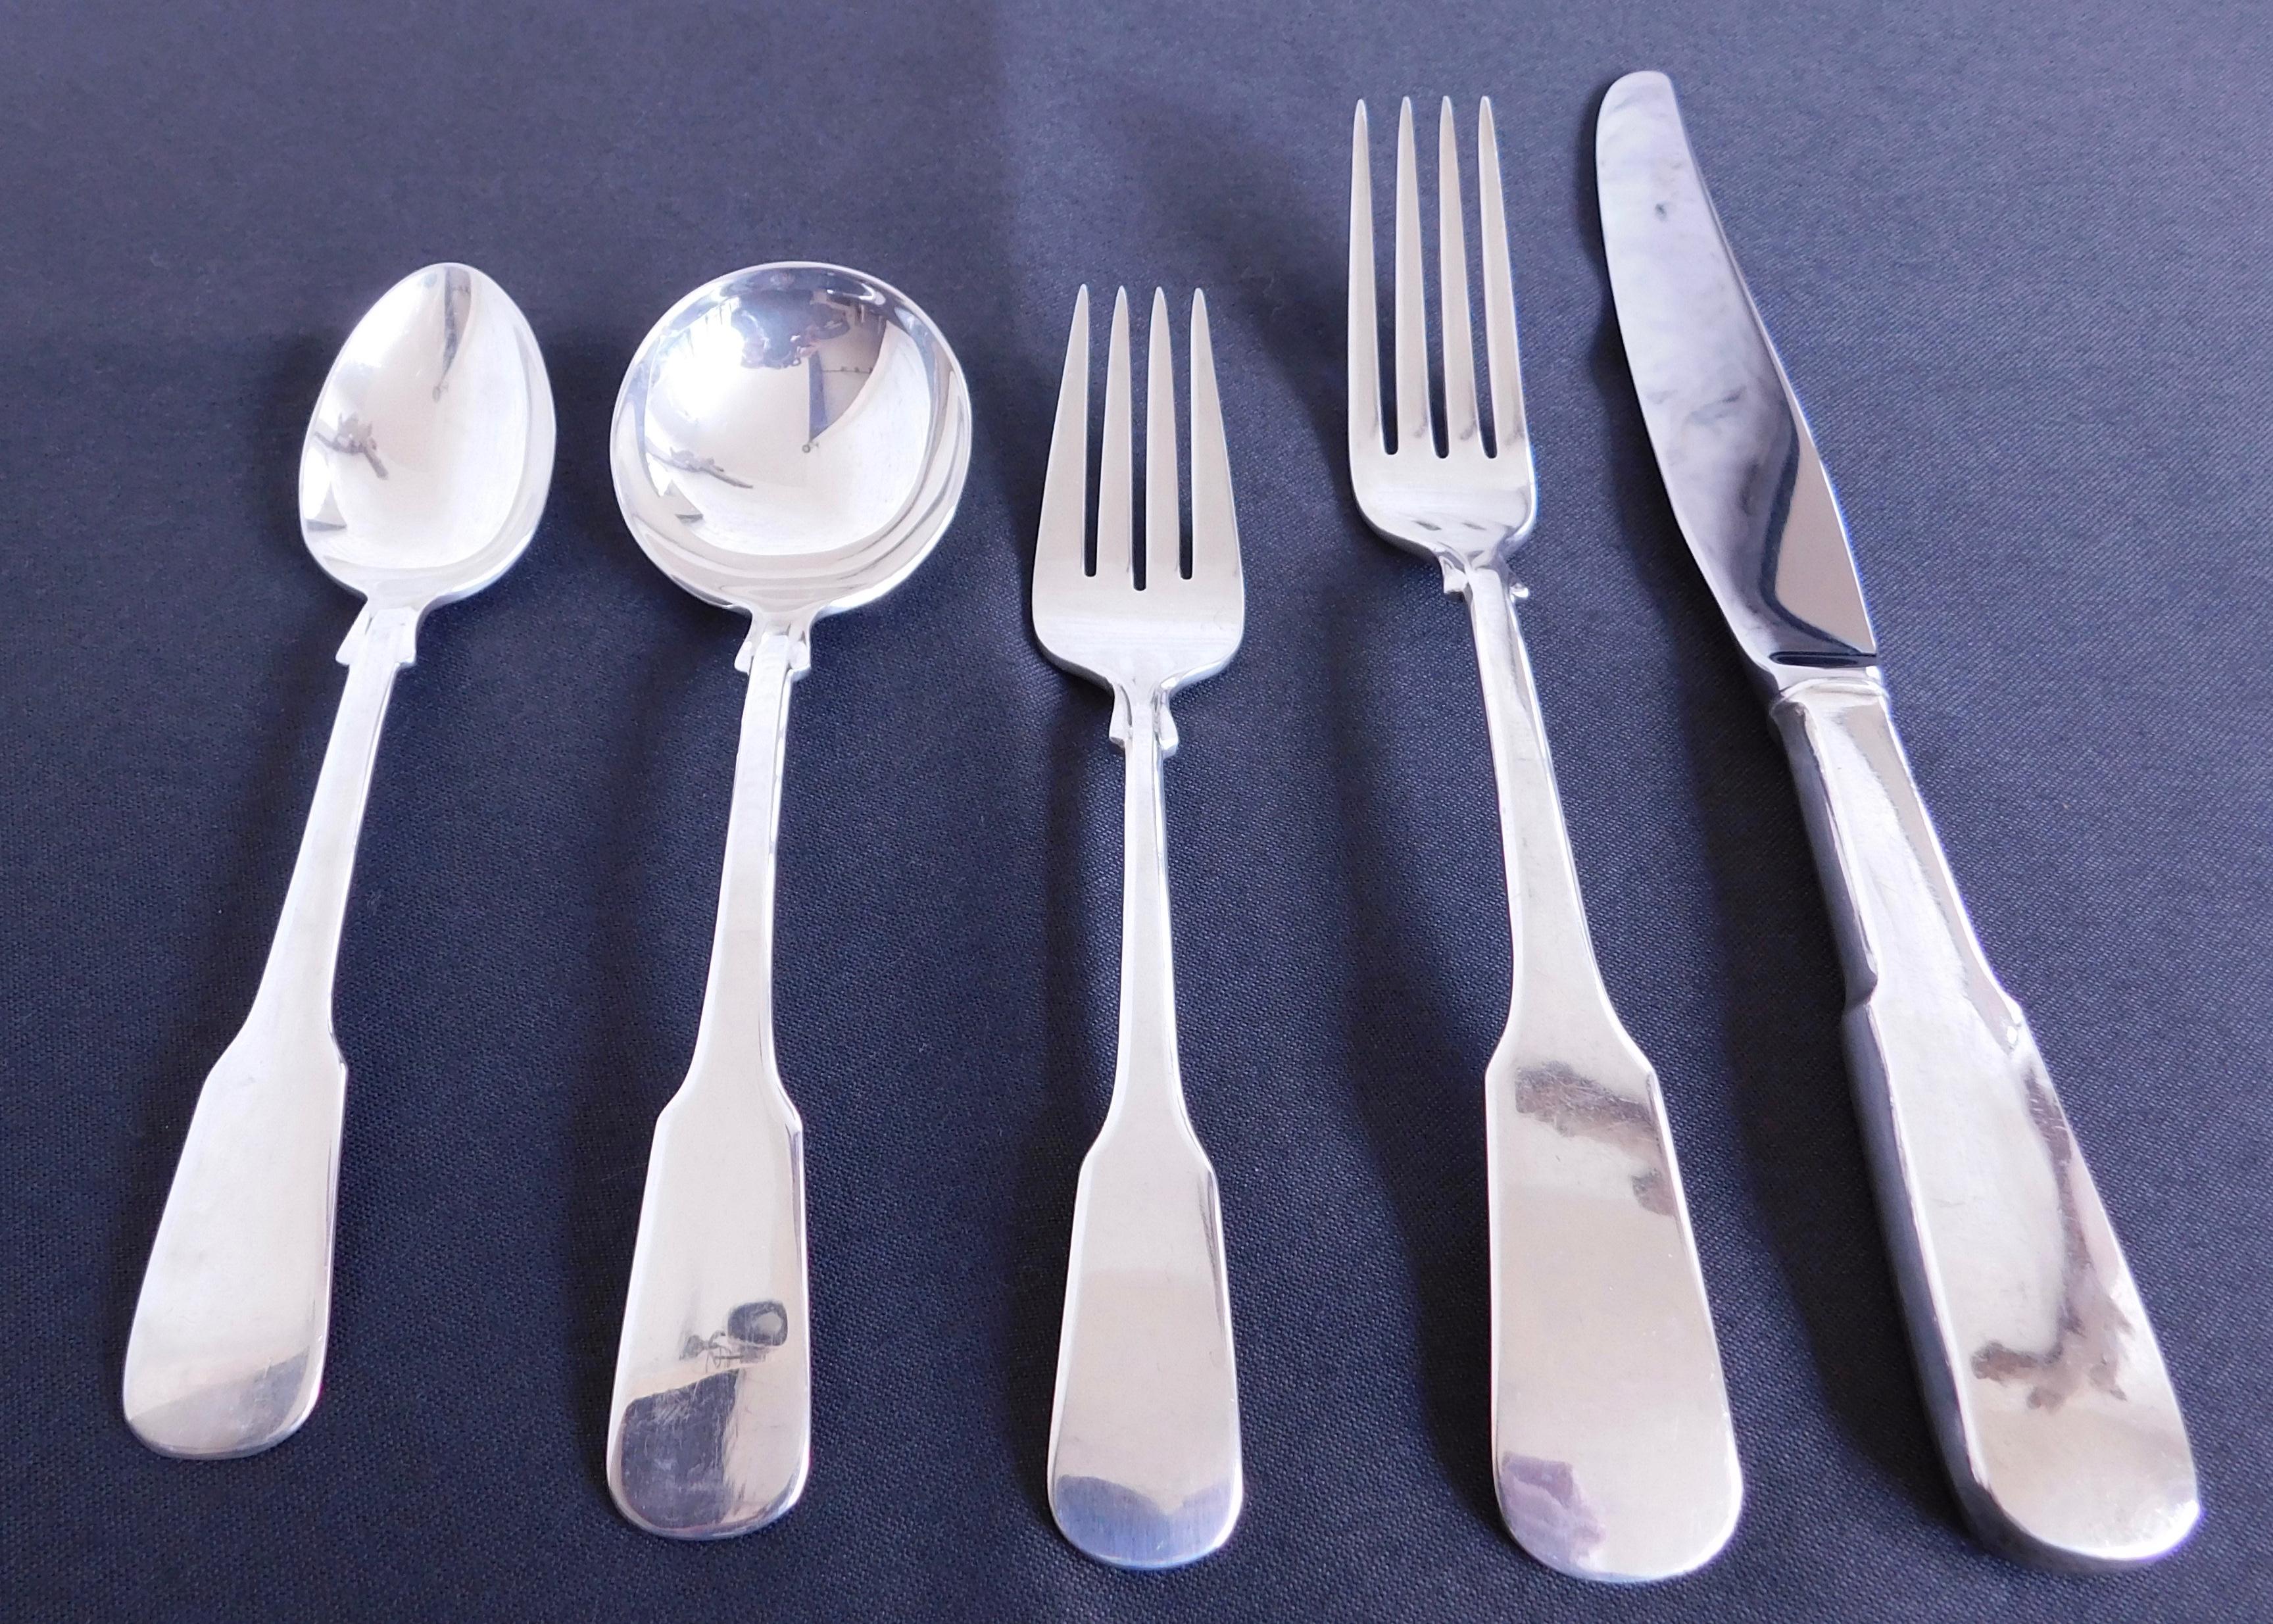 1810 pattern sterling silver 43 piece dinner flatware set by International Sterling Marked with 